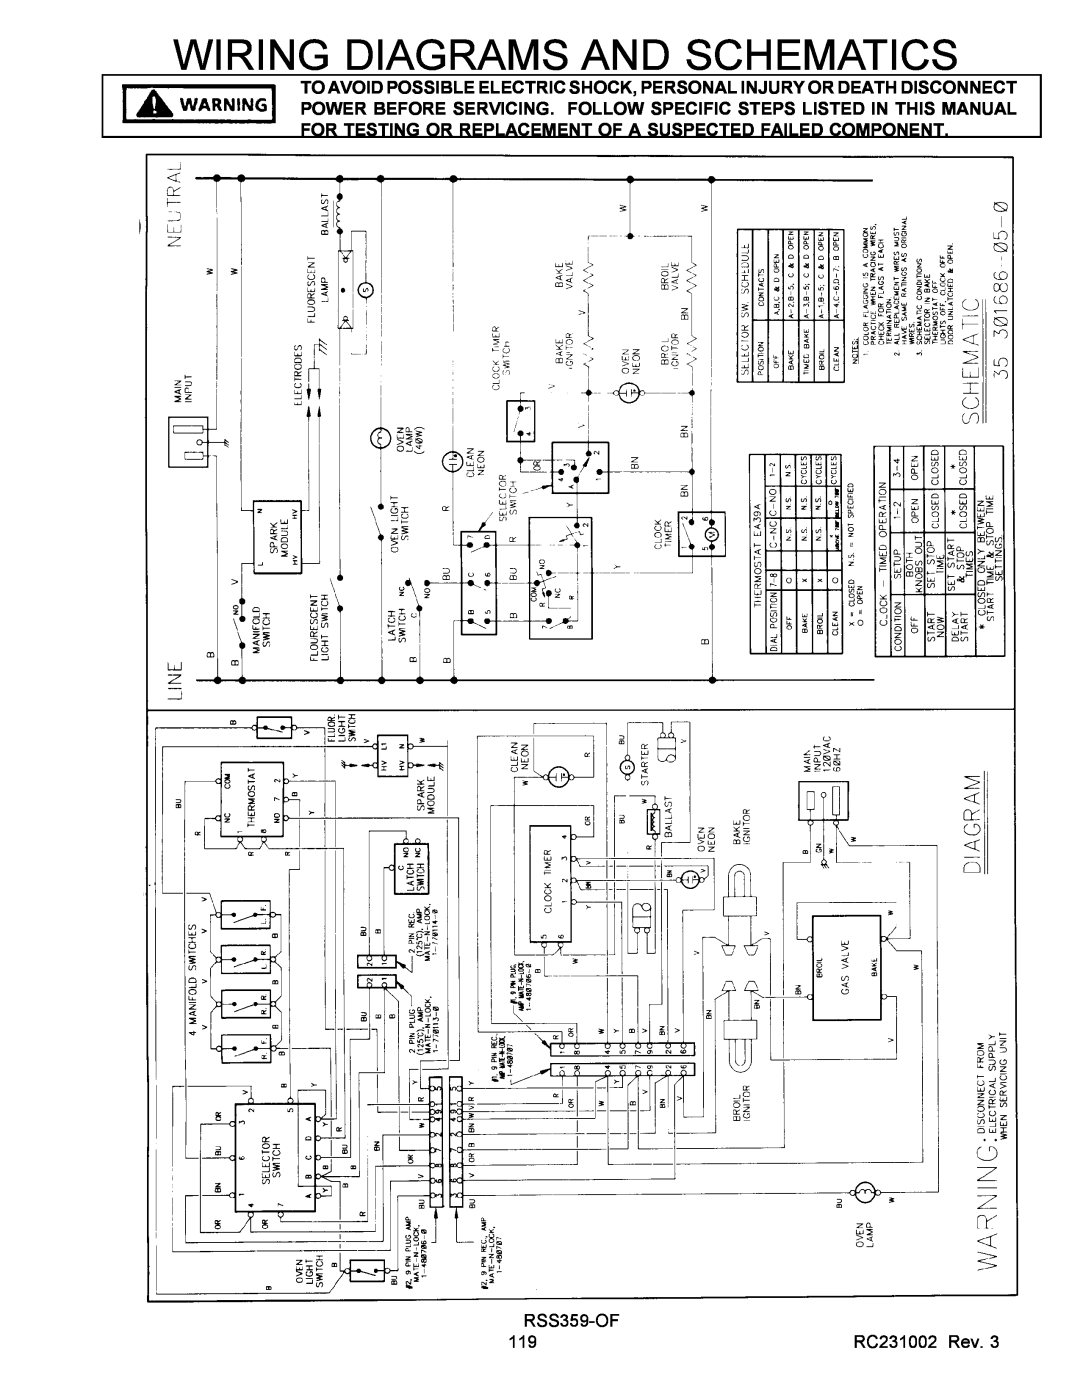 Amana RST service manual Wiring Diagrams And Schematics, RSS359-OF, RC231002 Rev 